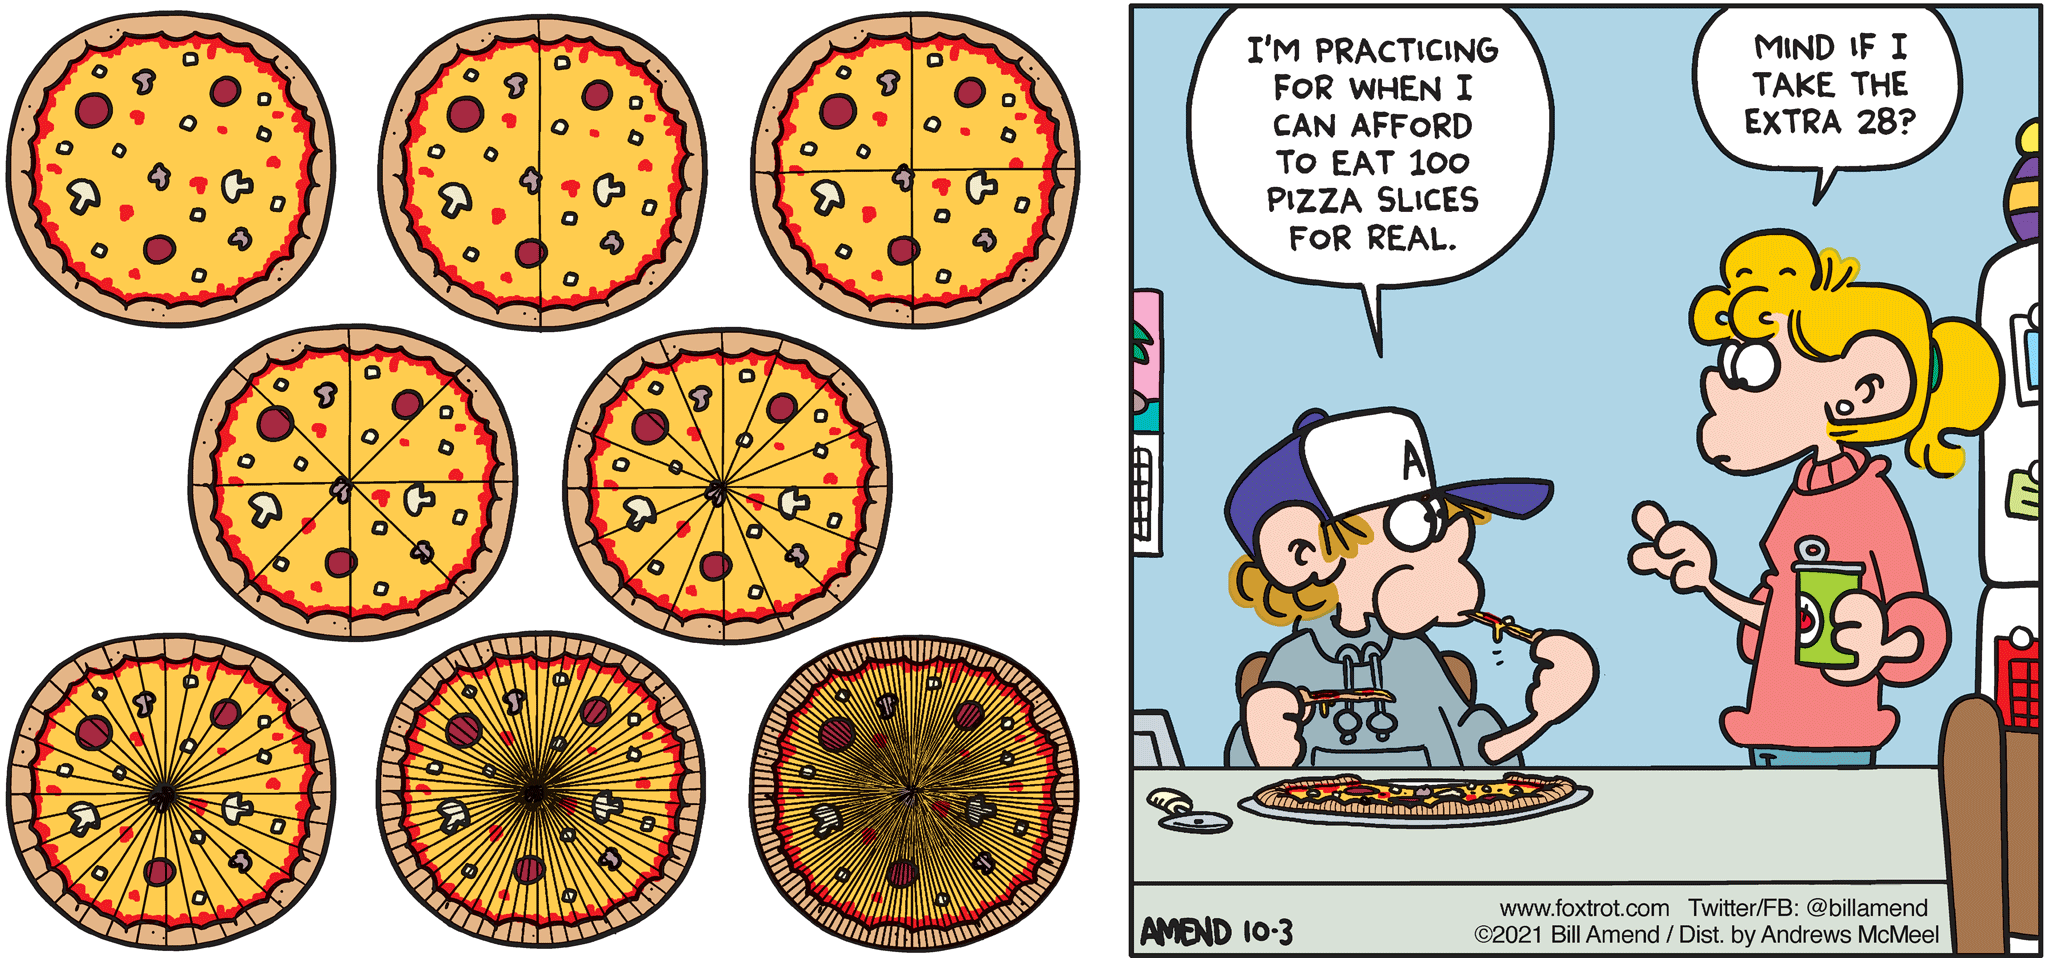 FoxTrot comic strip by Bill Amend - "Pizza Practice" published October 3, 2021 - Peter Fox: I'm practicing for when i can afford to eat 100 pizza slices for real. Paige Fox: Mind if I take the extra 28?